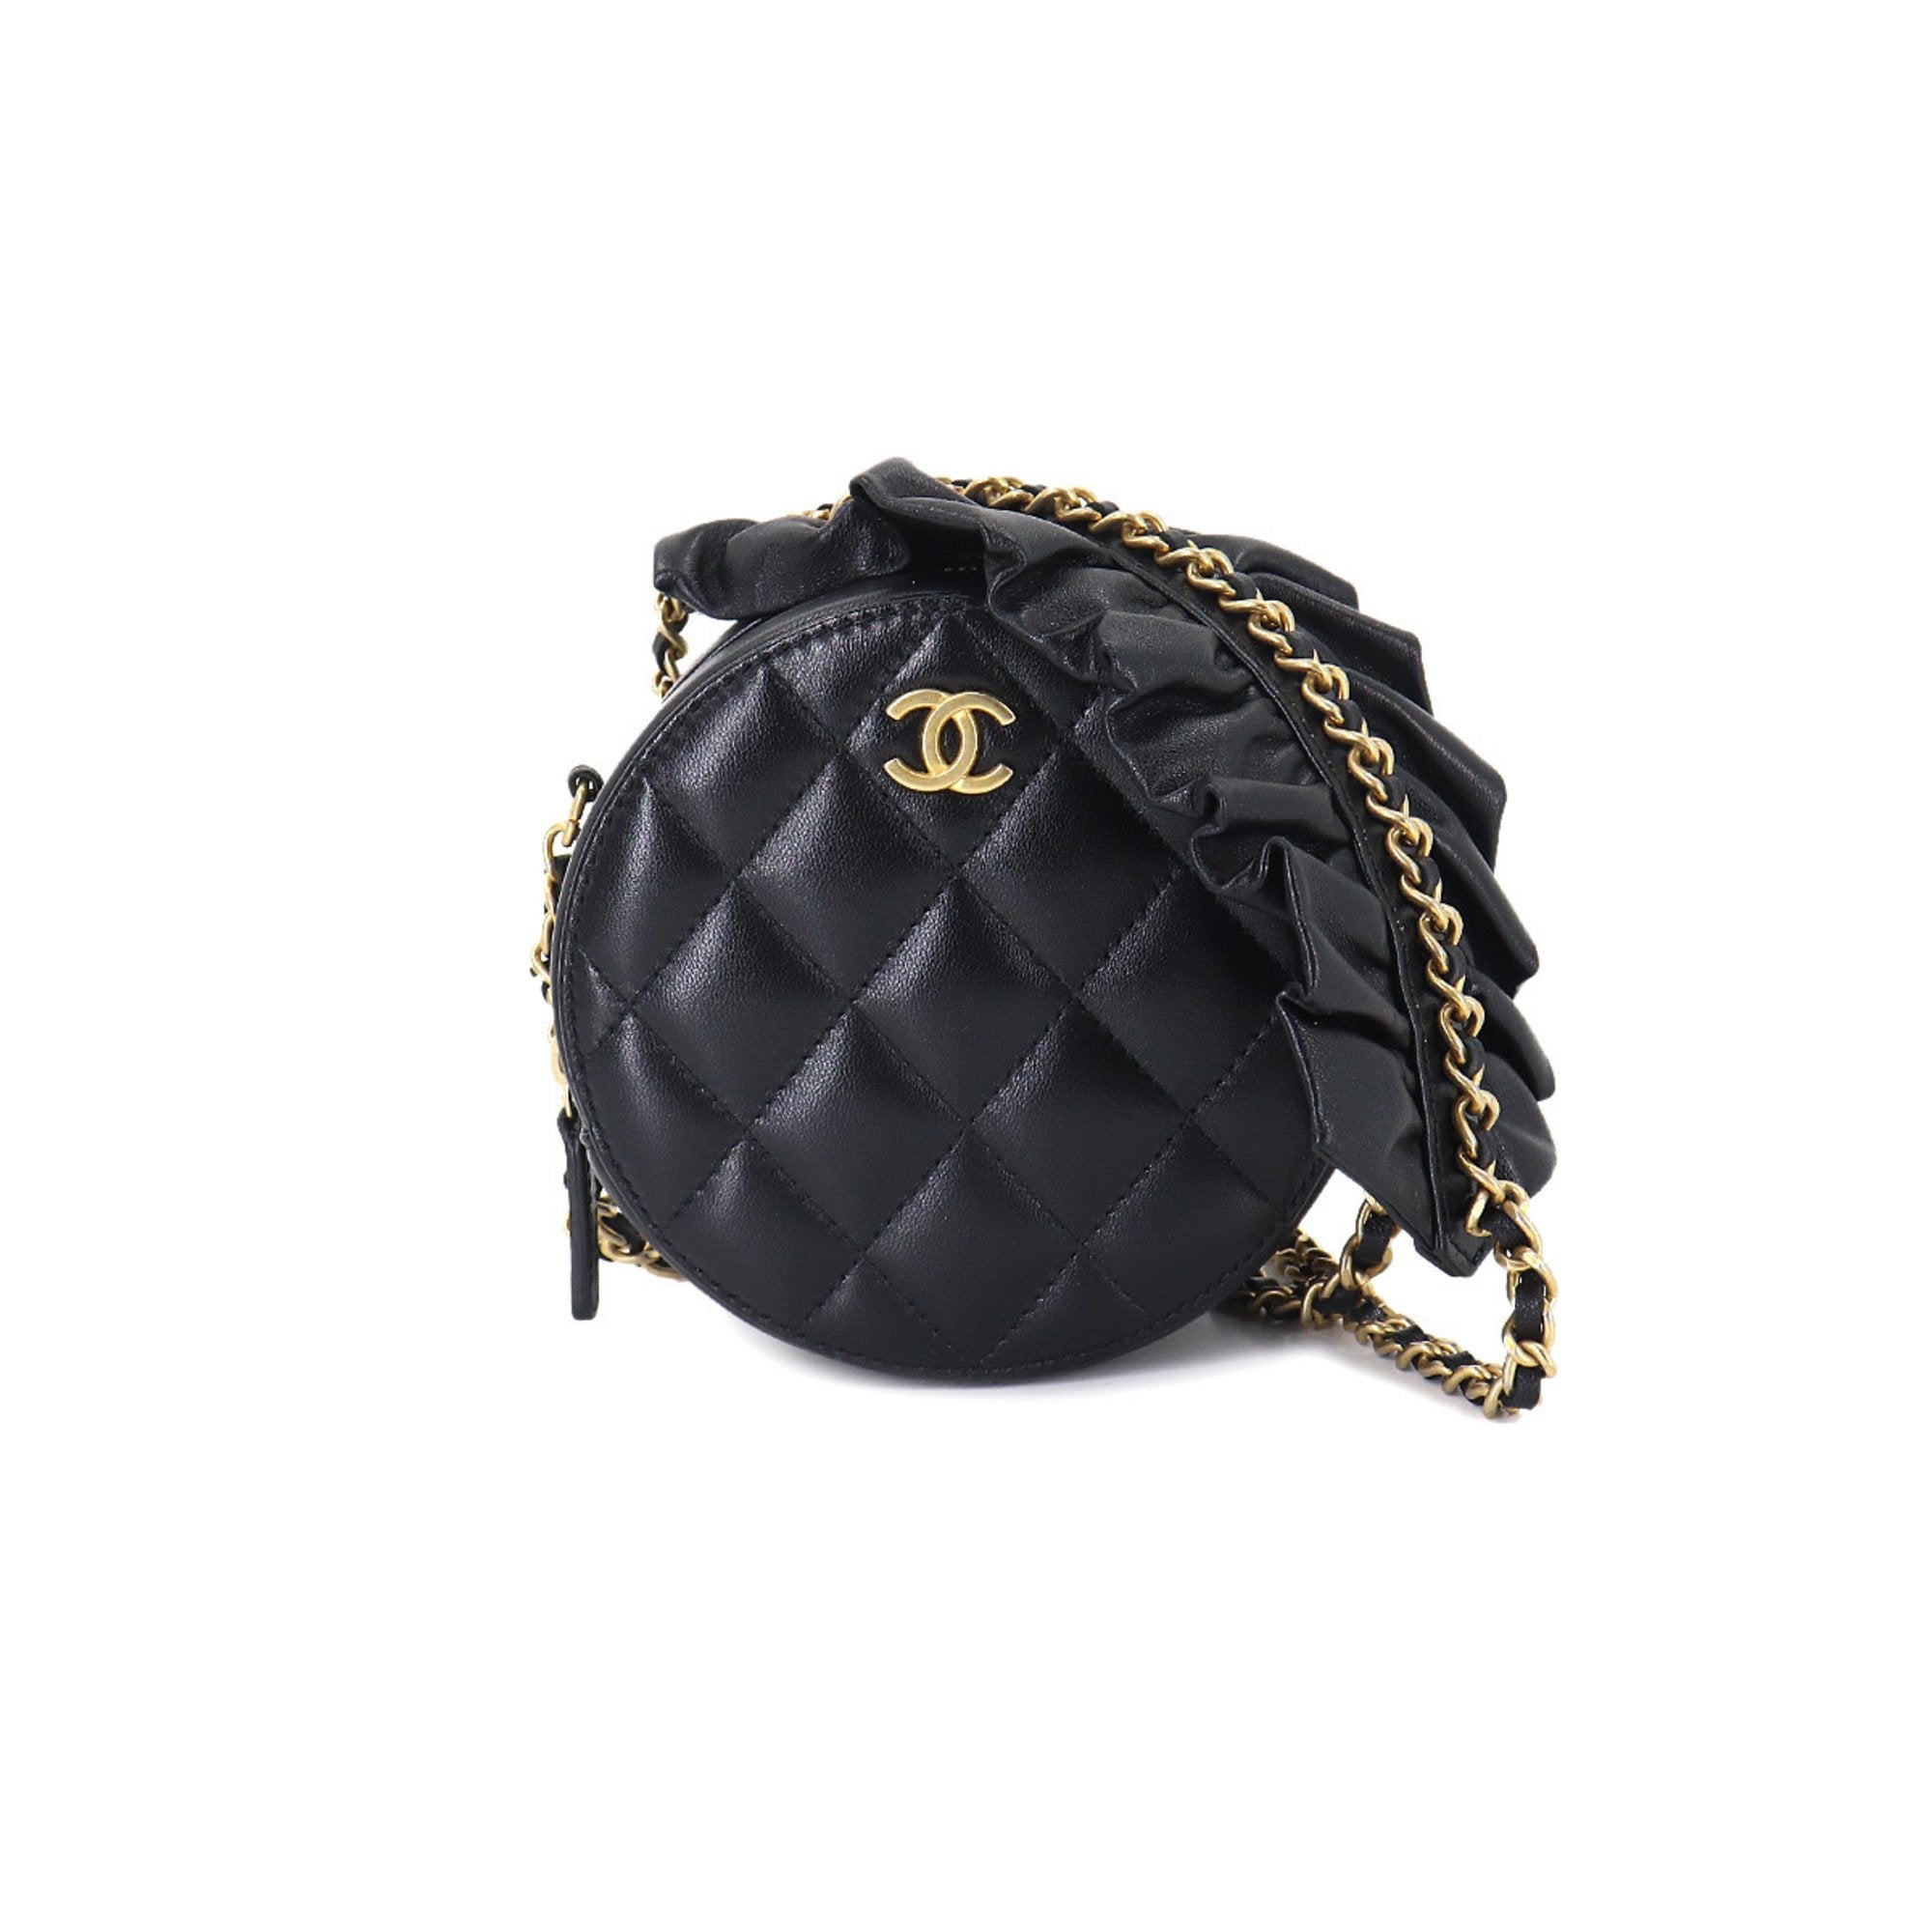 FIVE Reasons Why Im No Longer Buying Chanel Lambskin Bags Wear  Tear  Review  Fashion For Lunch